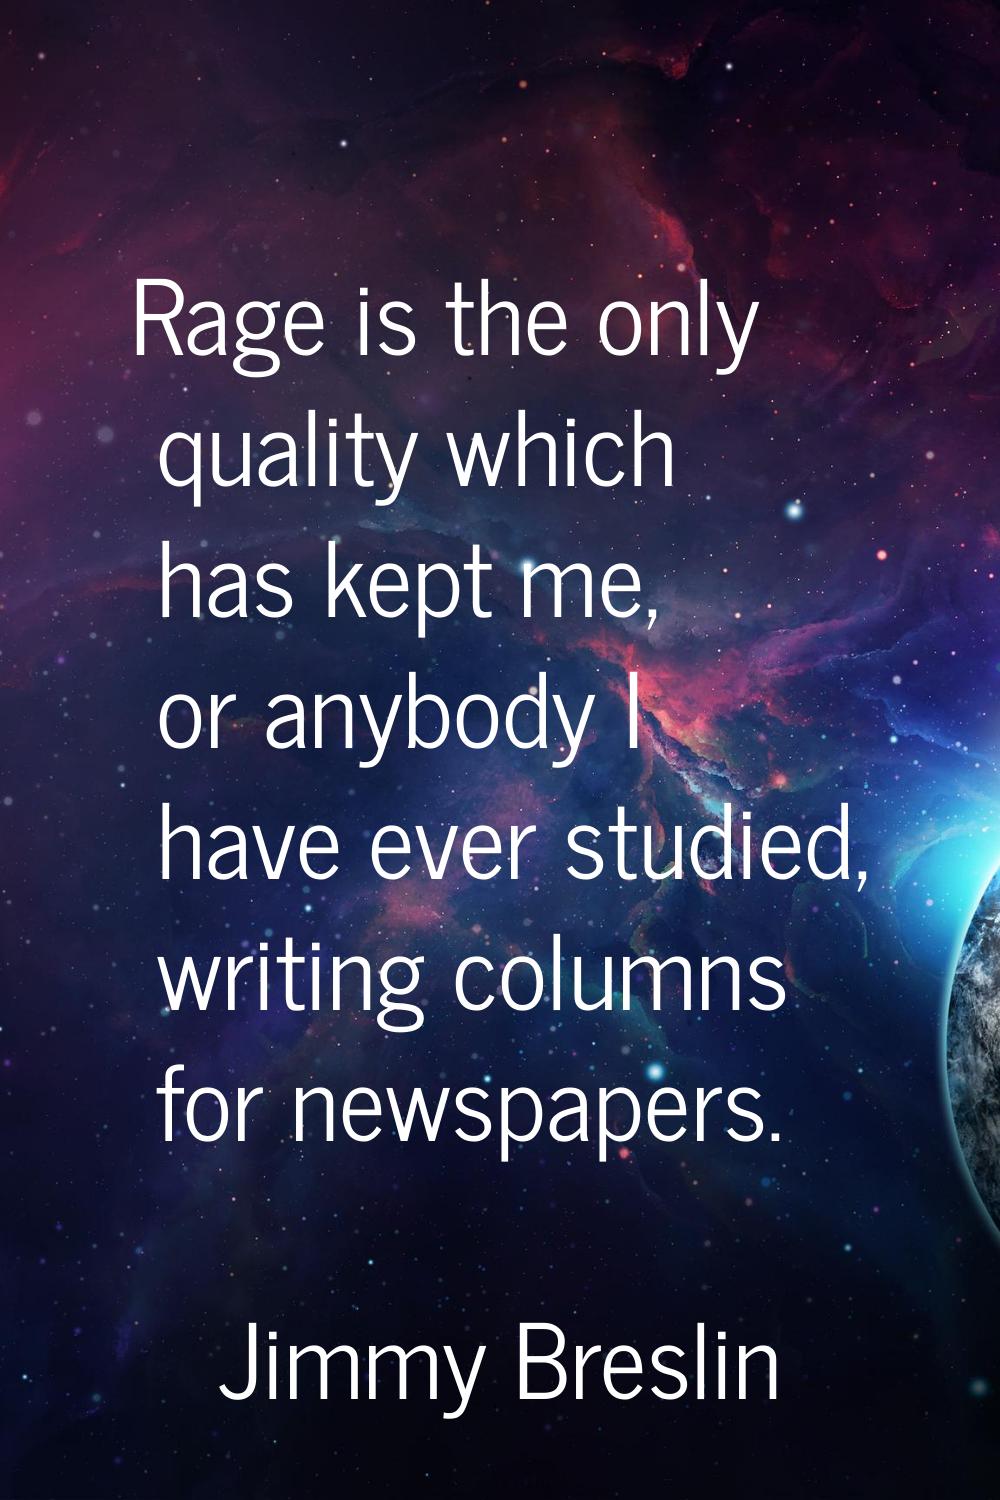 Rage is the only quality which has kept me, or anybody I have ever studied, writing columns for new